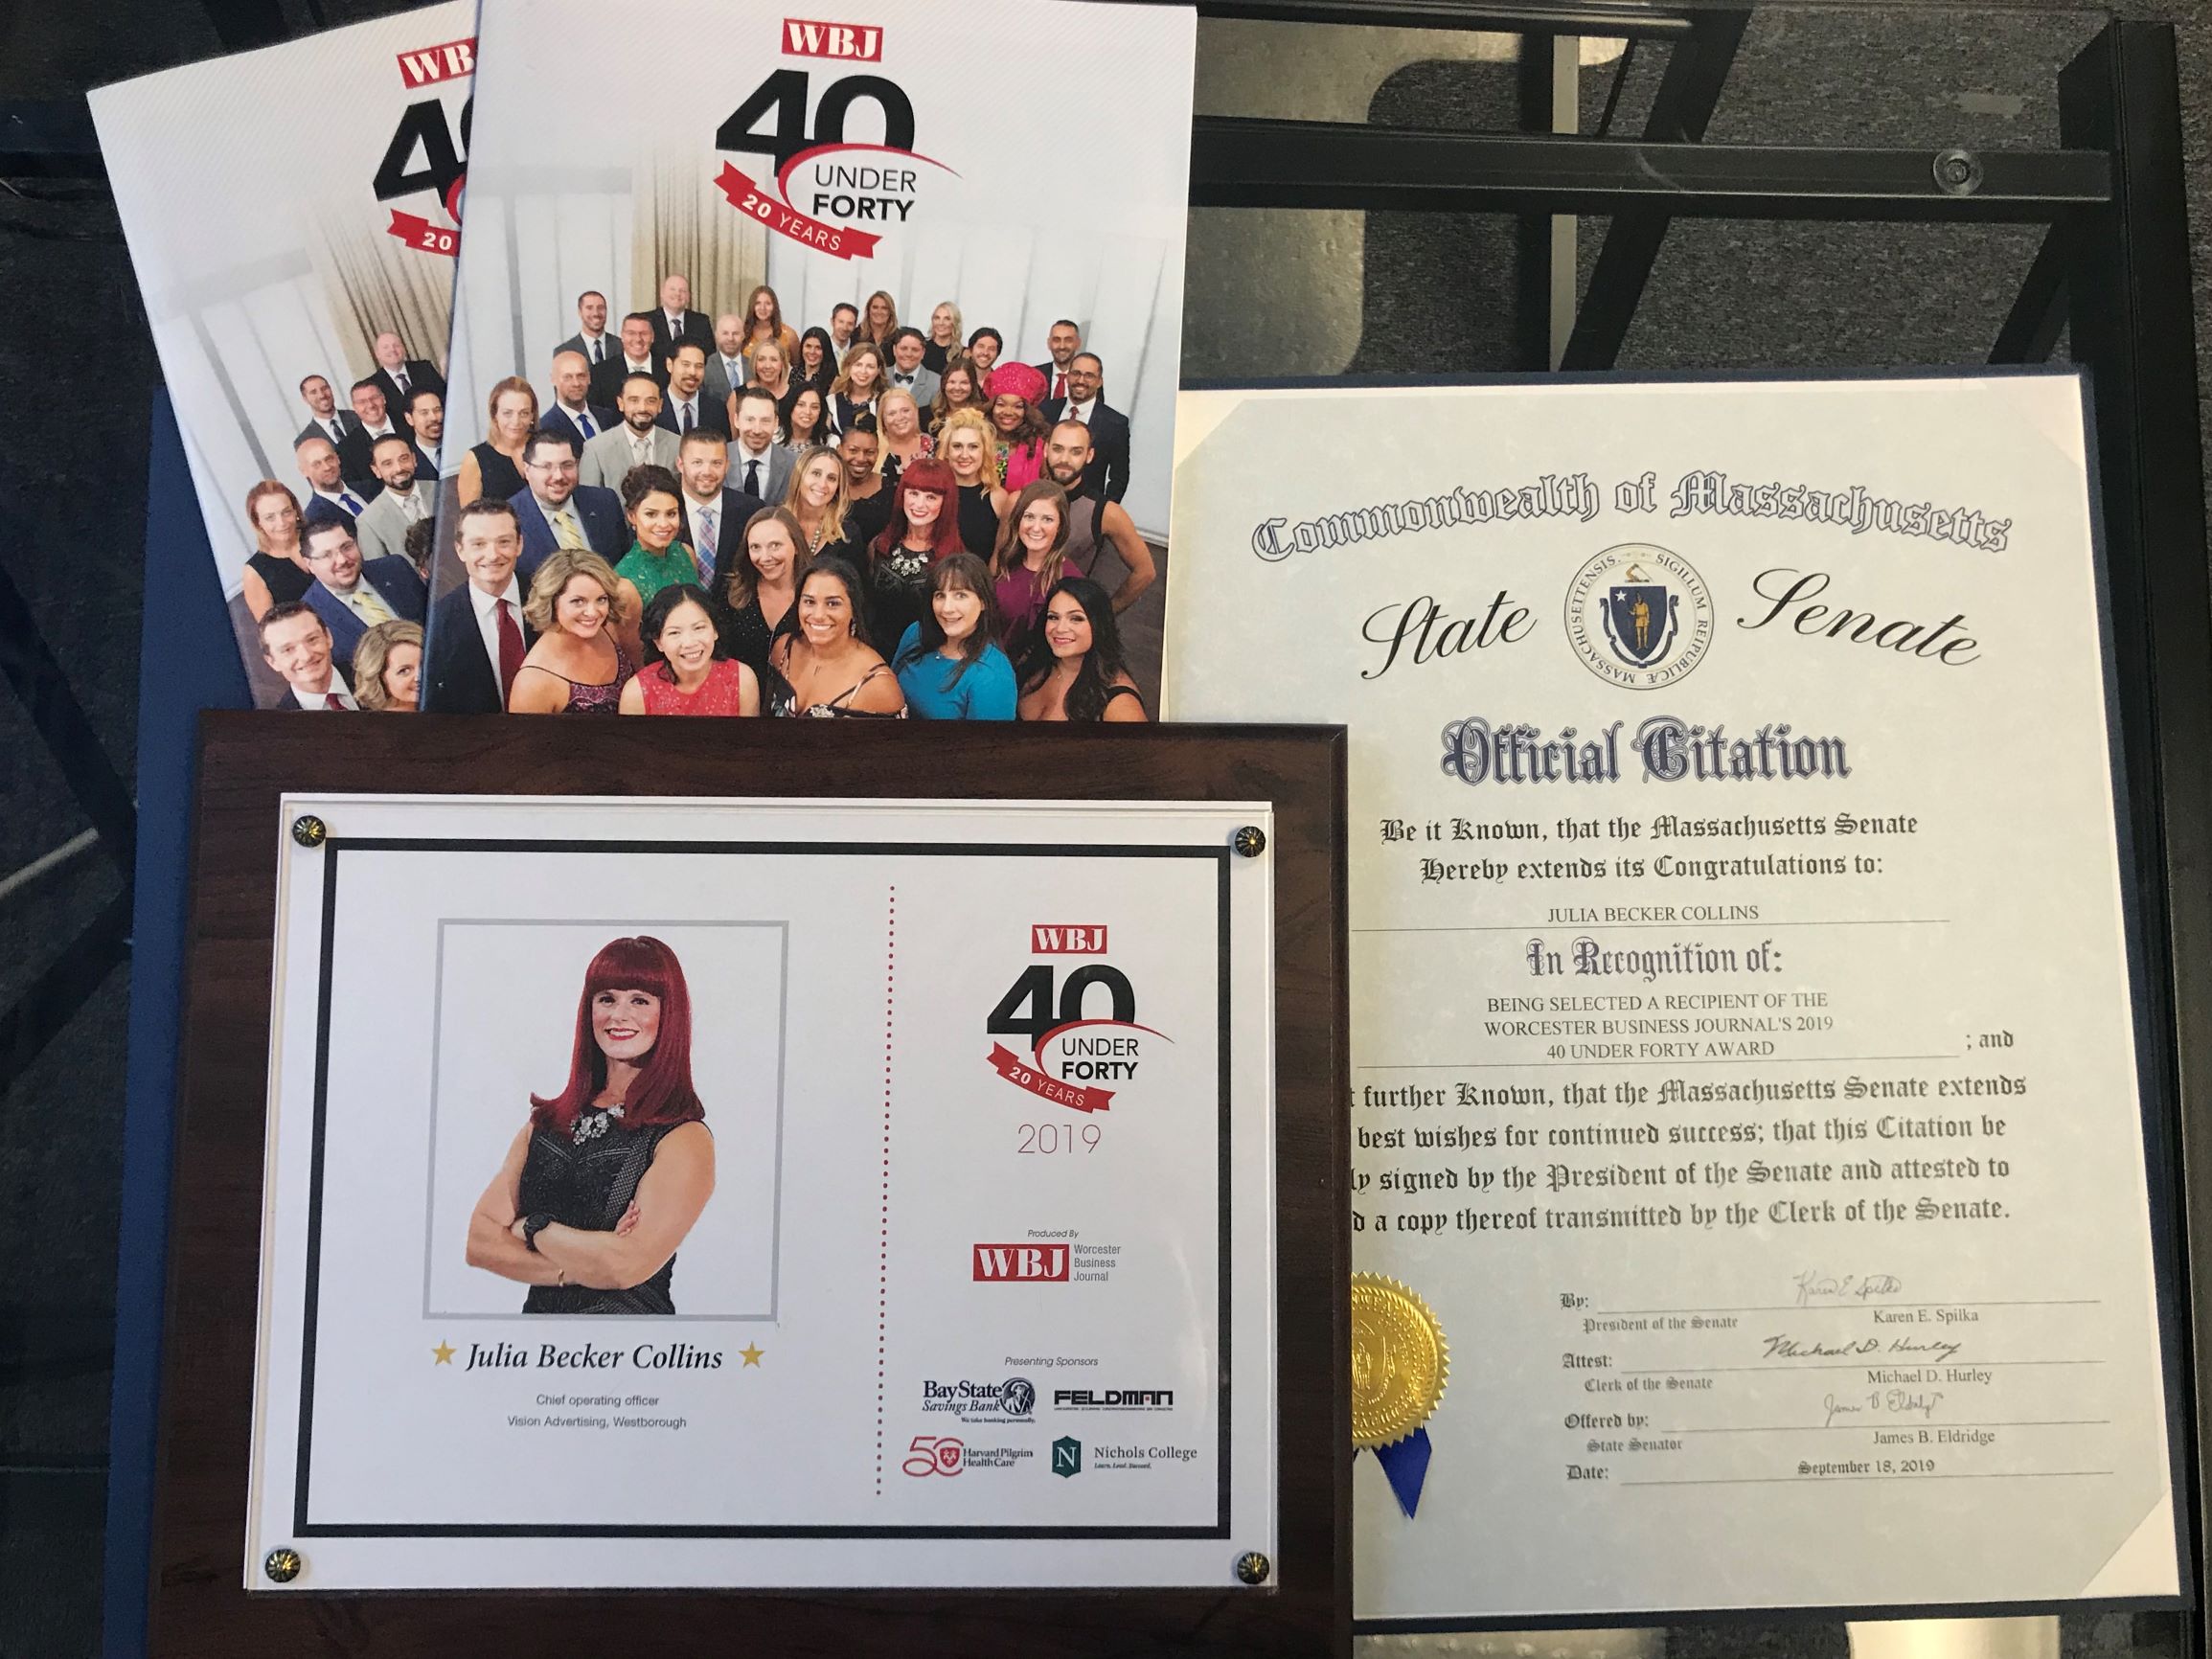 Collection of awards and collateral from 40 Under Forty program.